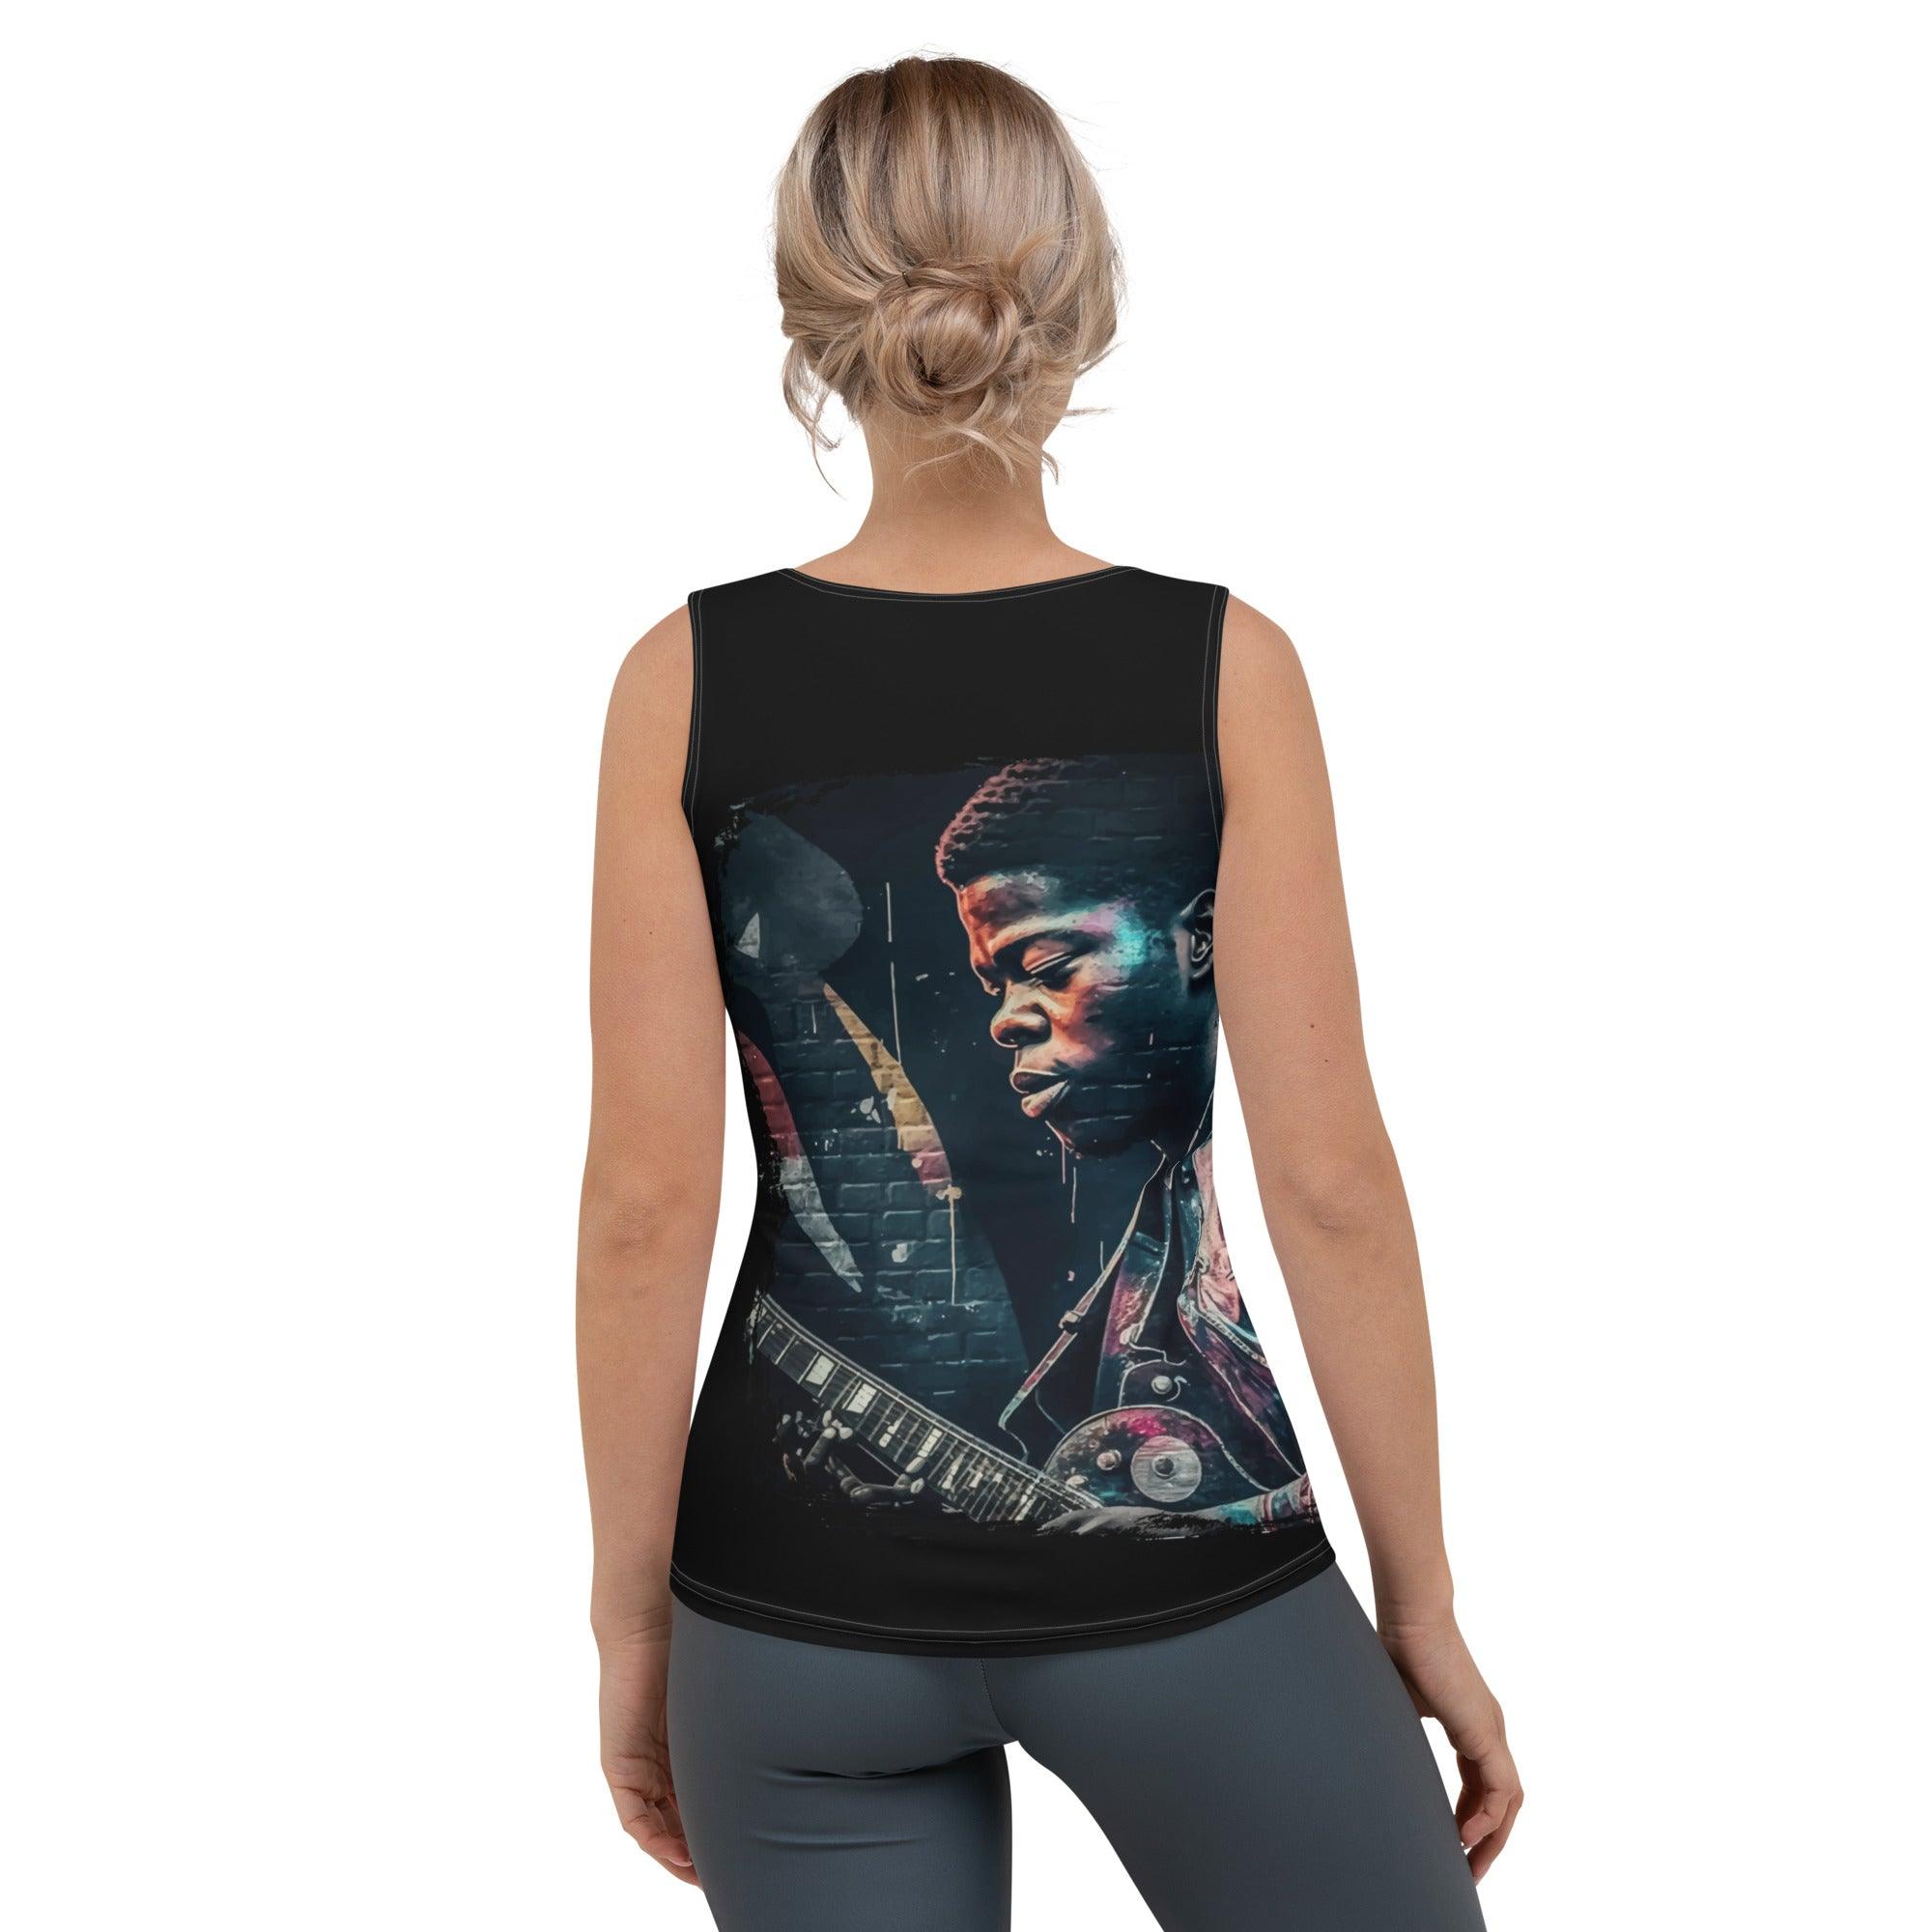 Fingers on Fire, Strings Ablaze Sublimation Cut & Sew Tank Top - Beyond T-shirts